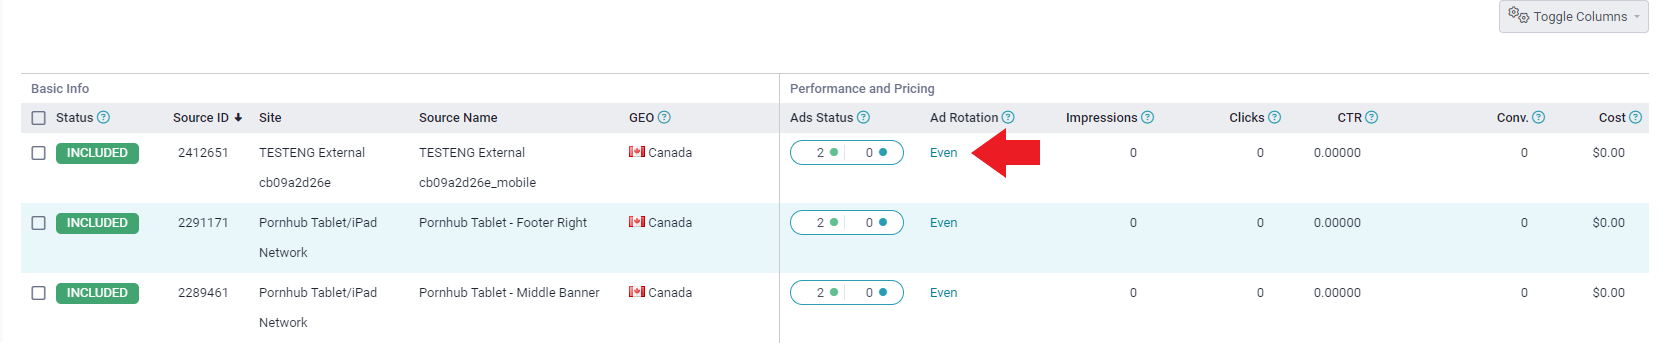 By default, the ad rotation for your campaign will be EVEN